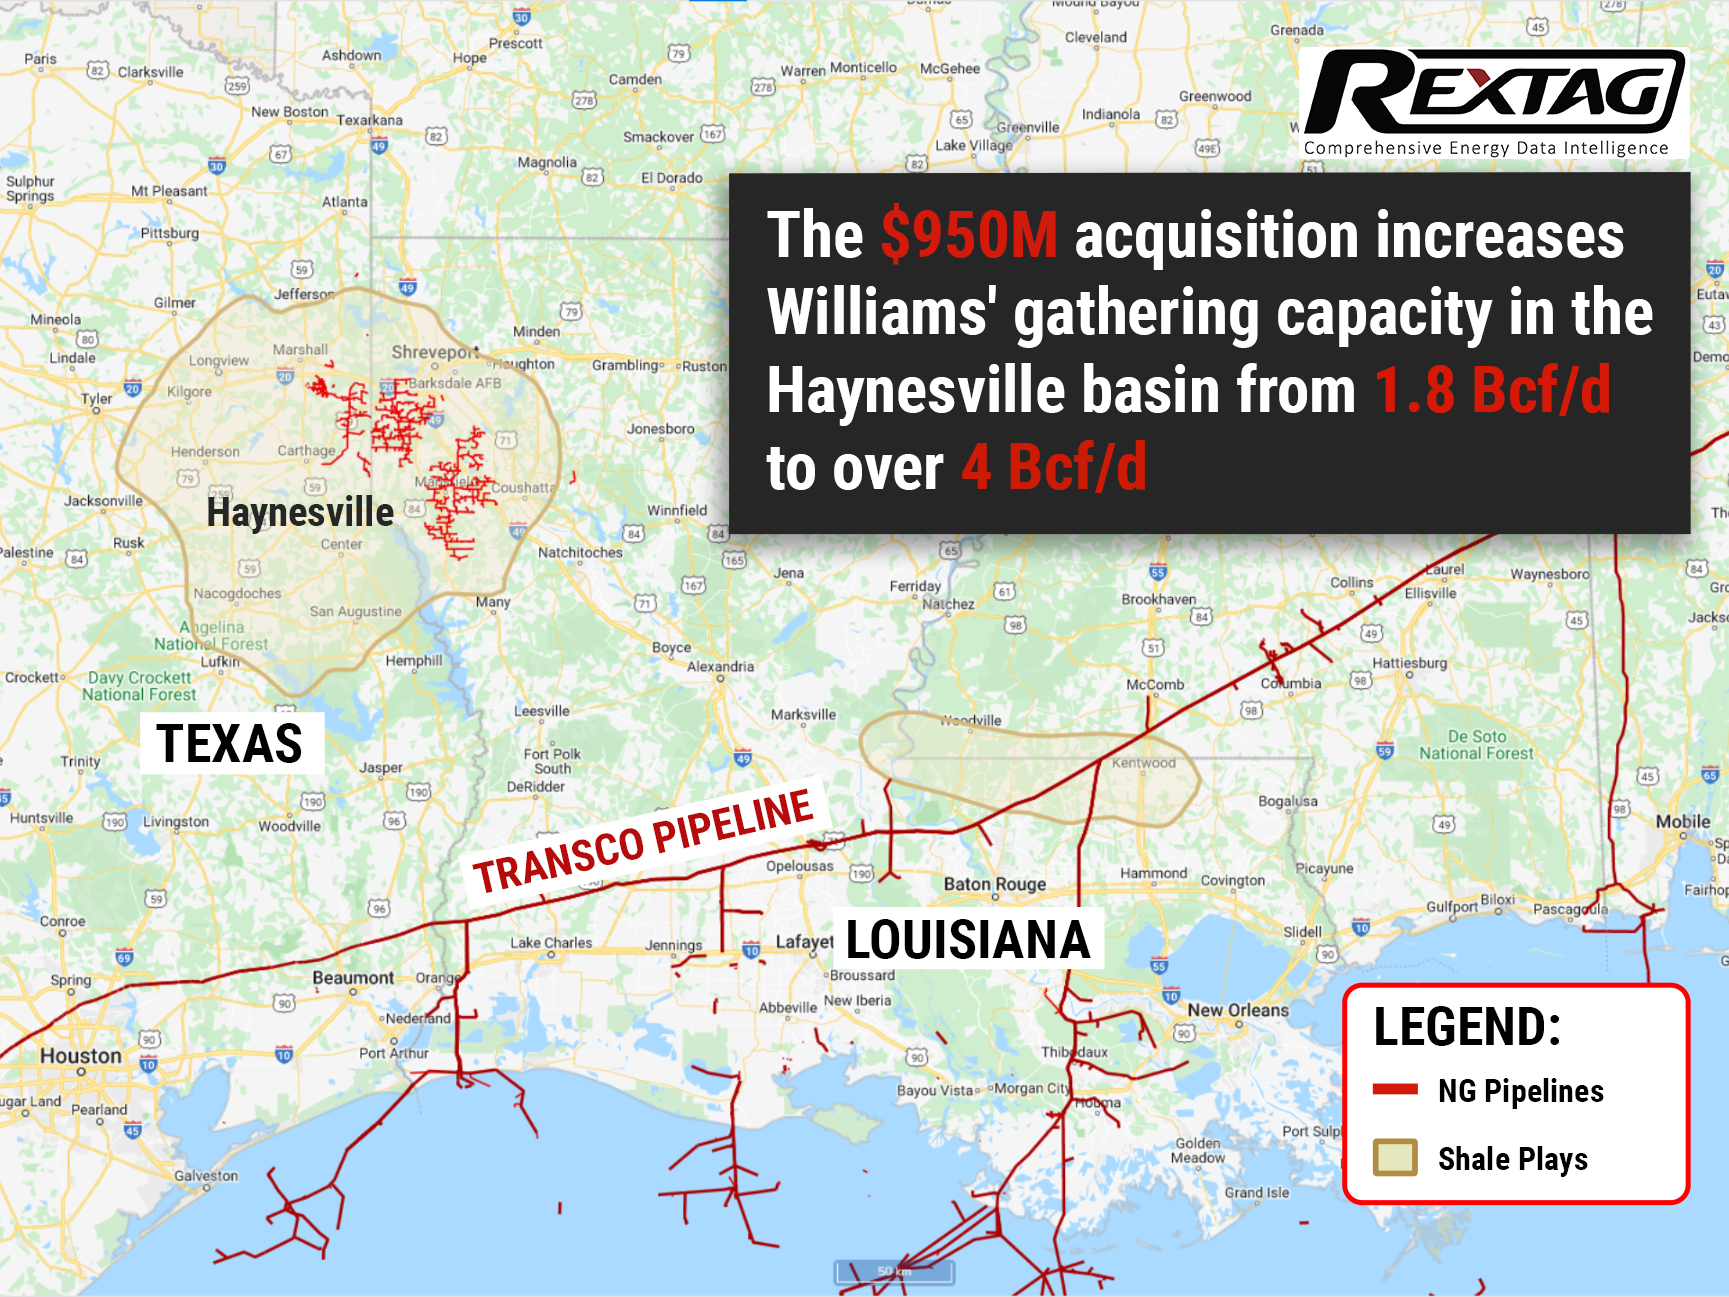 1B-Deal-Williams-Buys-Out-Houston-based-Midstream-in-Haynesville-Basin